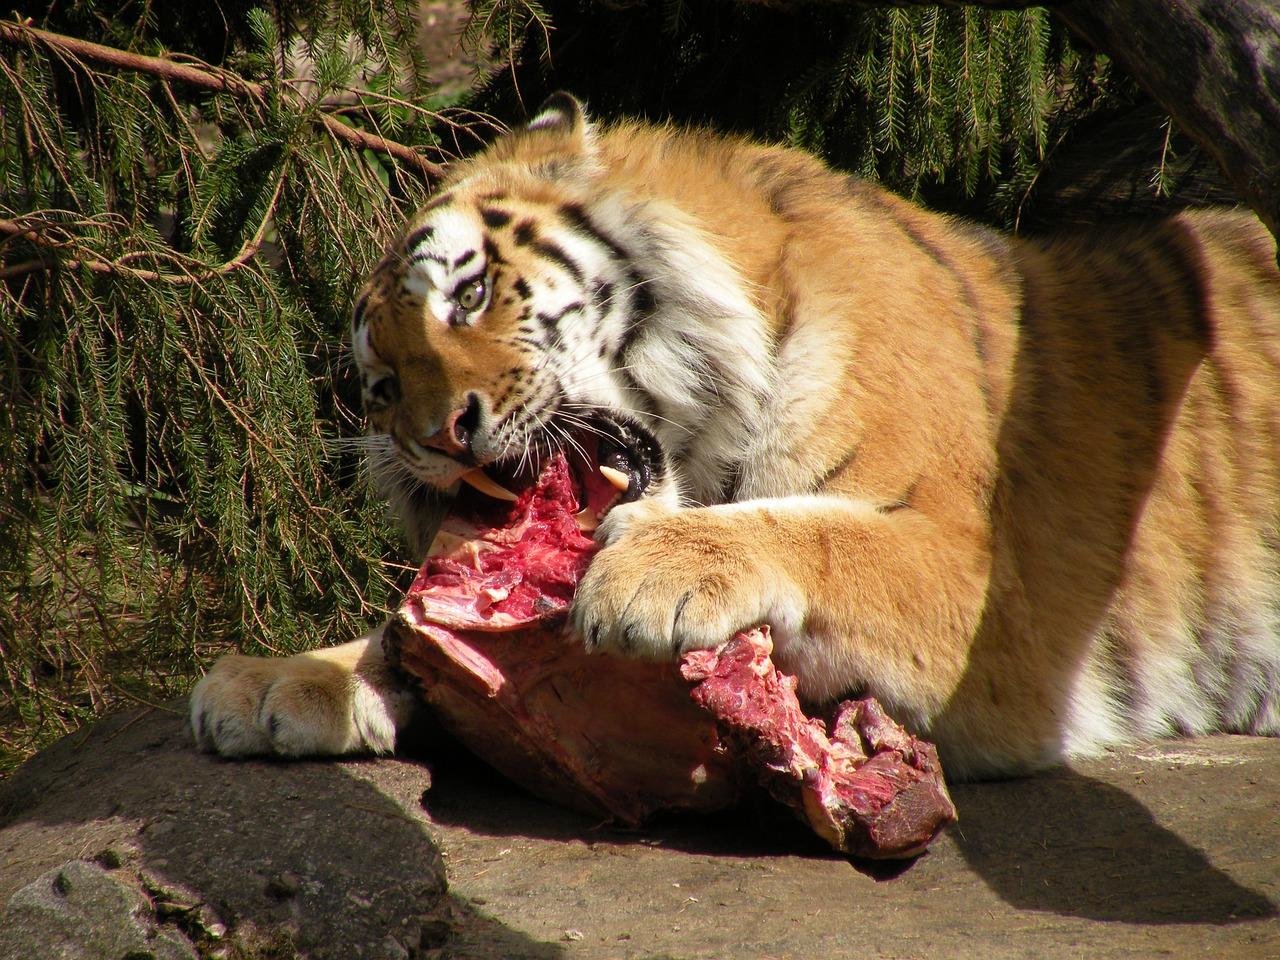 Who eats tiger meat? 